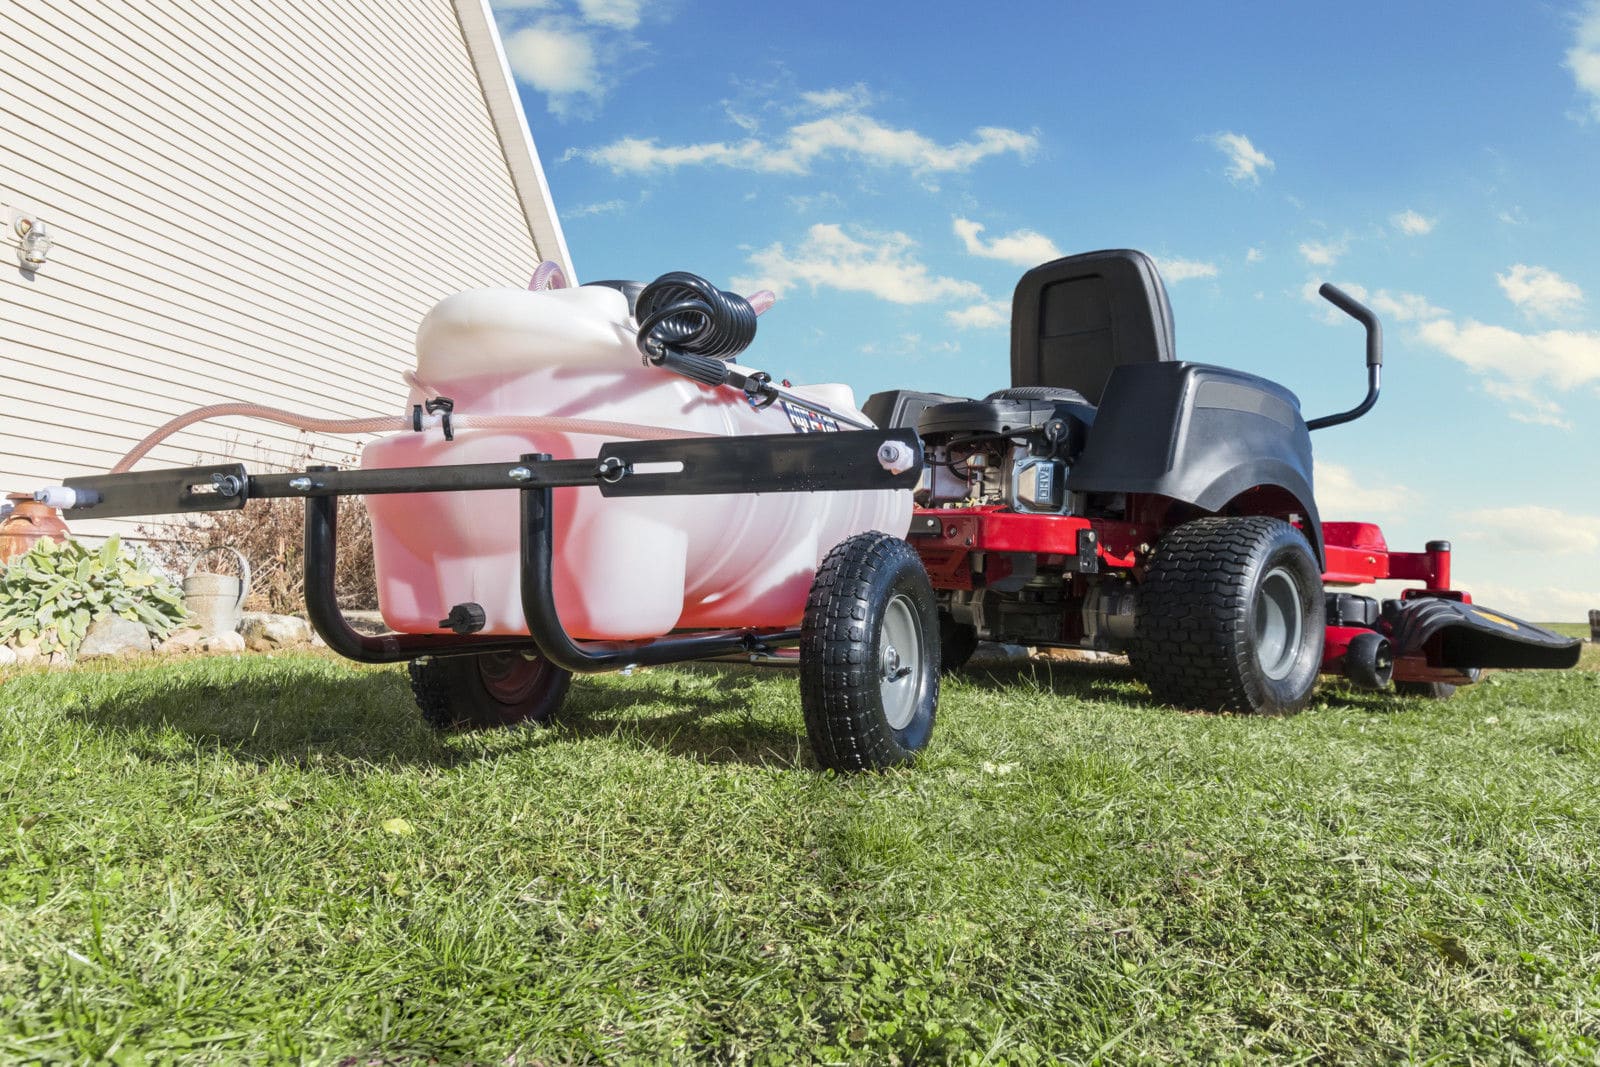 7 Best Tow Behind Sprayers - Relaxing Way To Work! (Spring 2022)